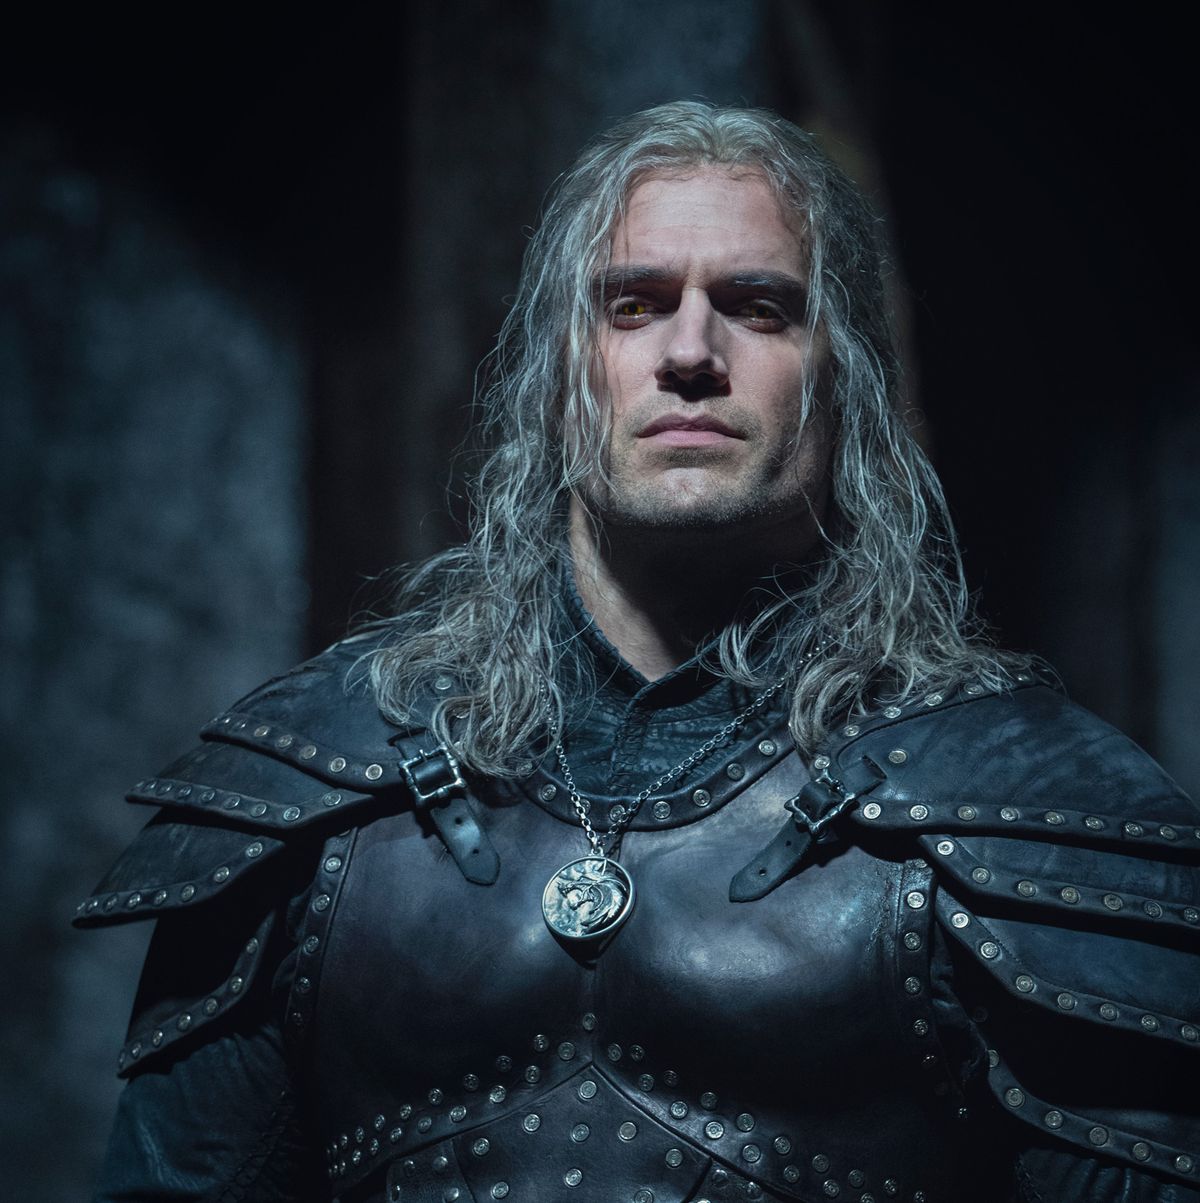 THE WITCHER - Season 4 - First Look Trailer